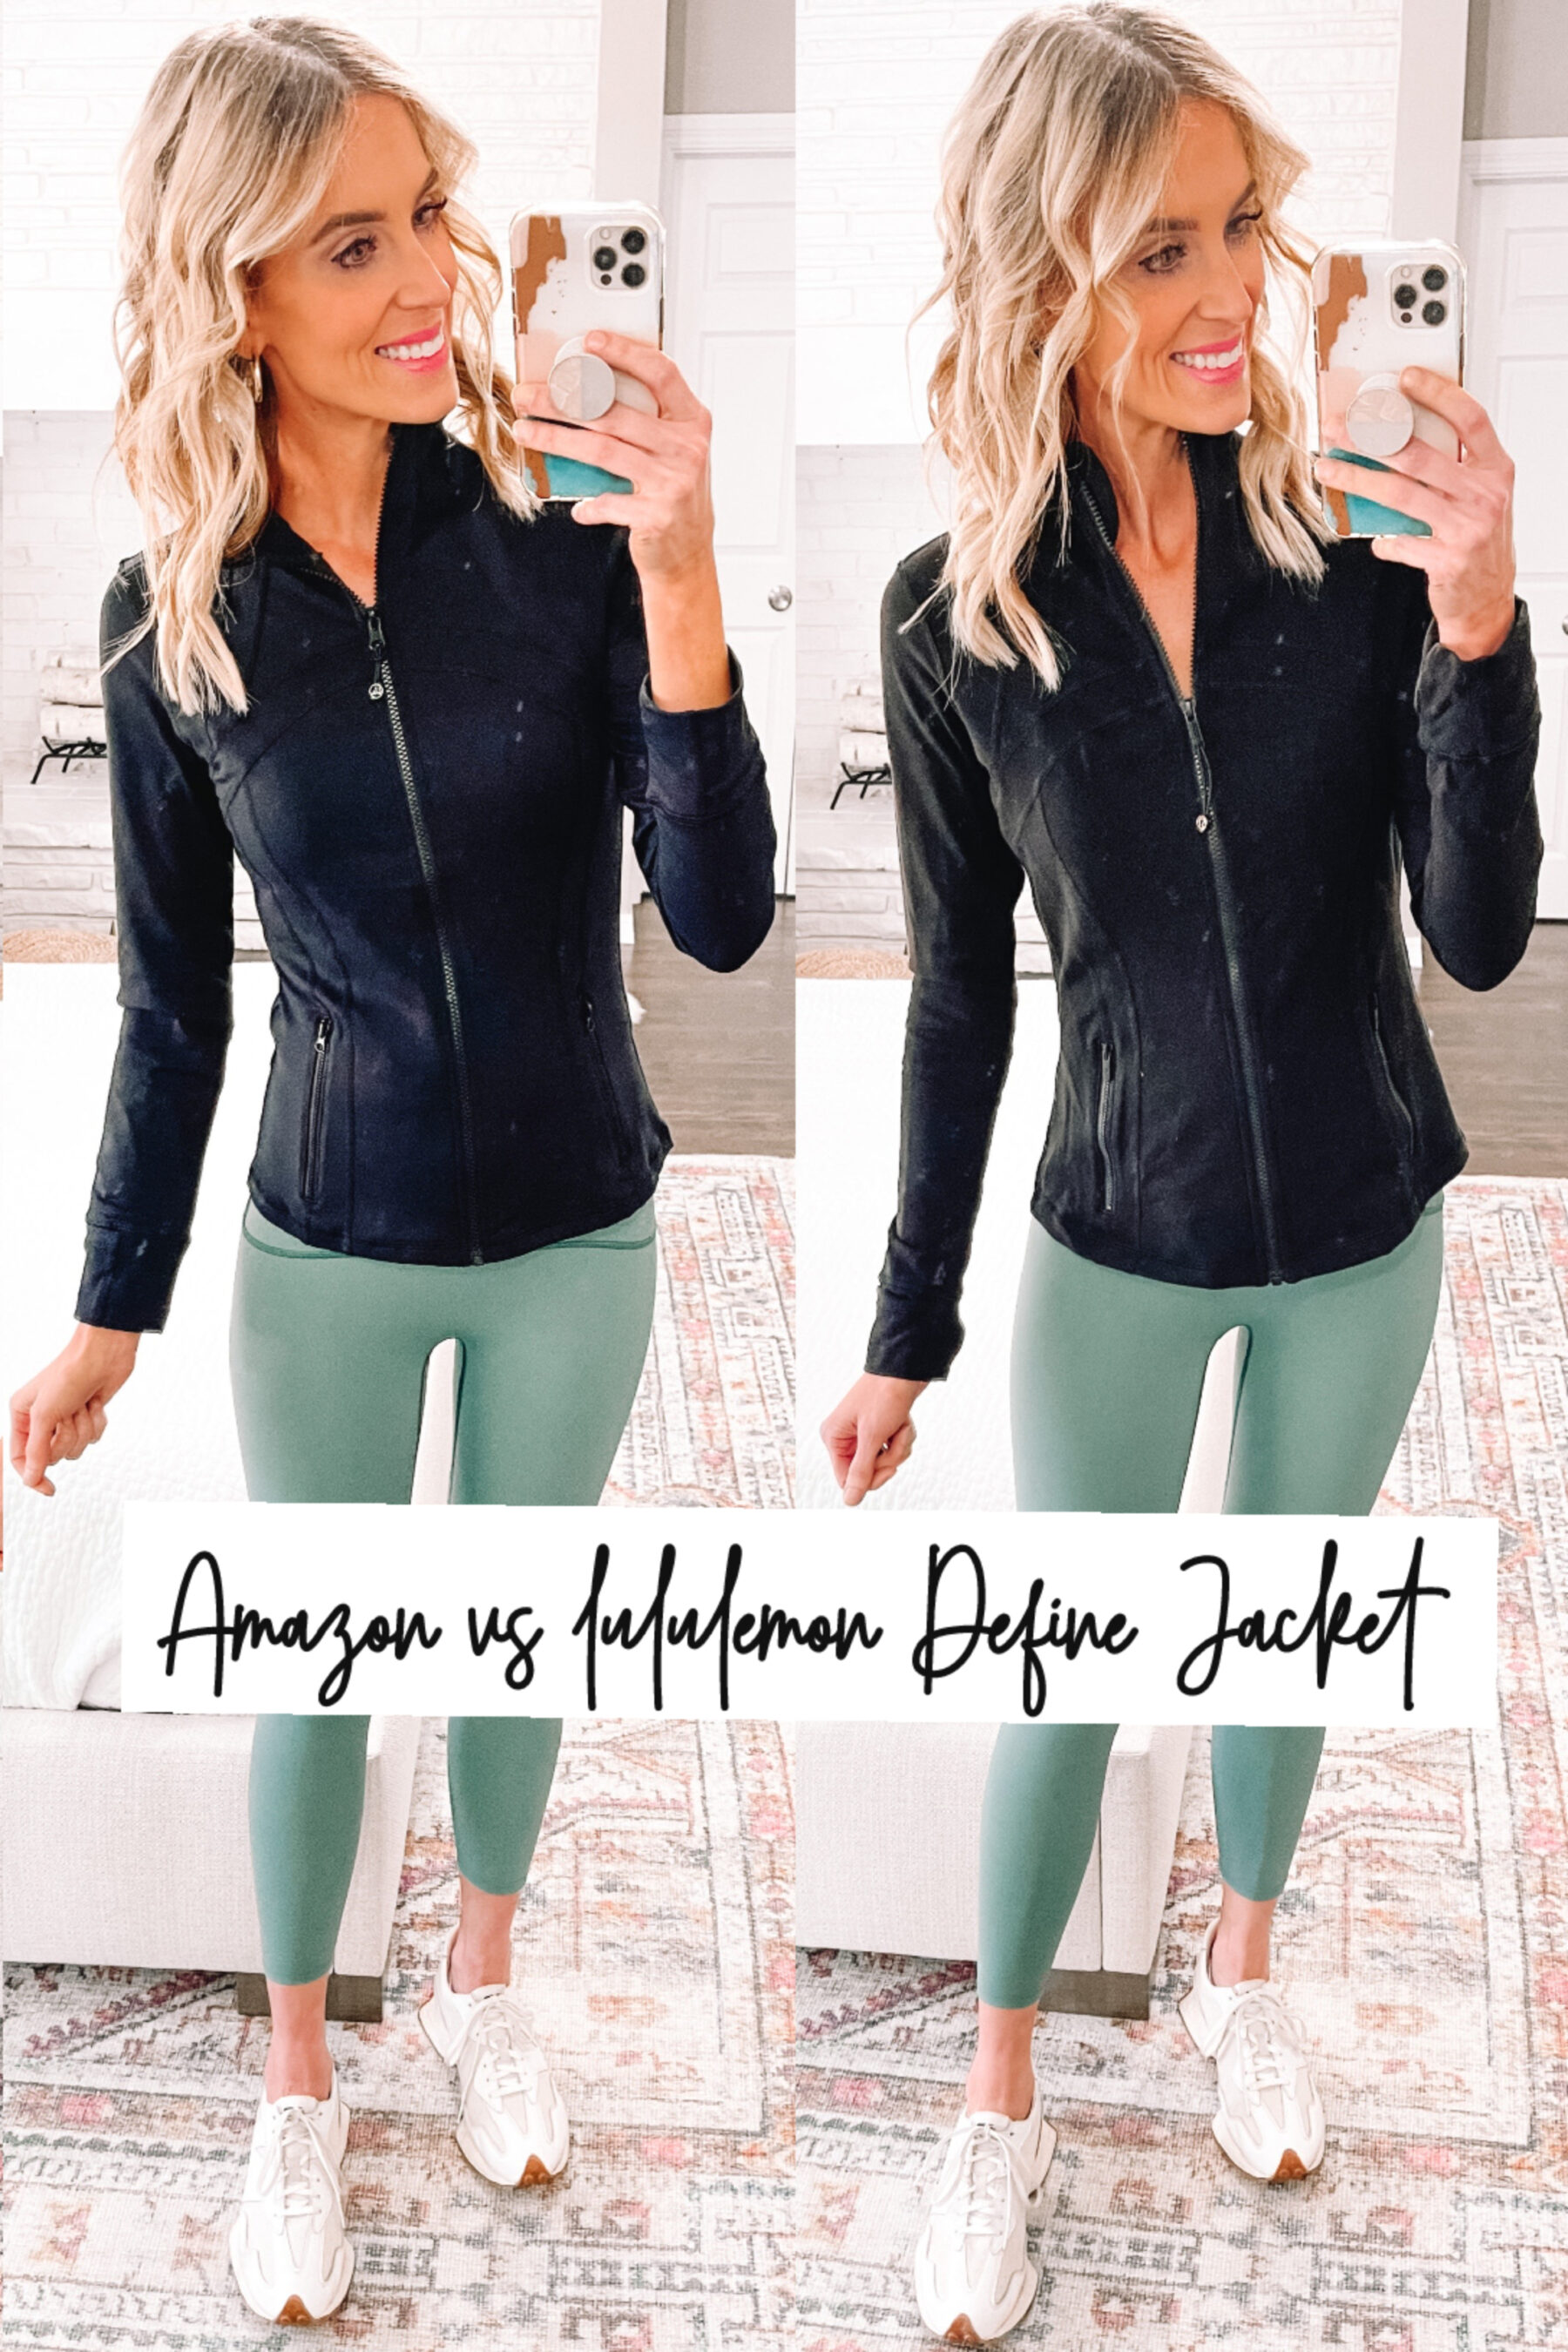 Shoppers Are Calling This Under-$50  Jacket a Matching Dupe for  Lululemon's $118 Define Jacket